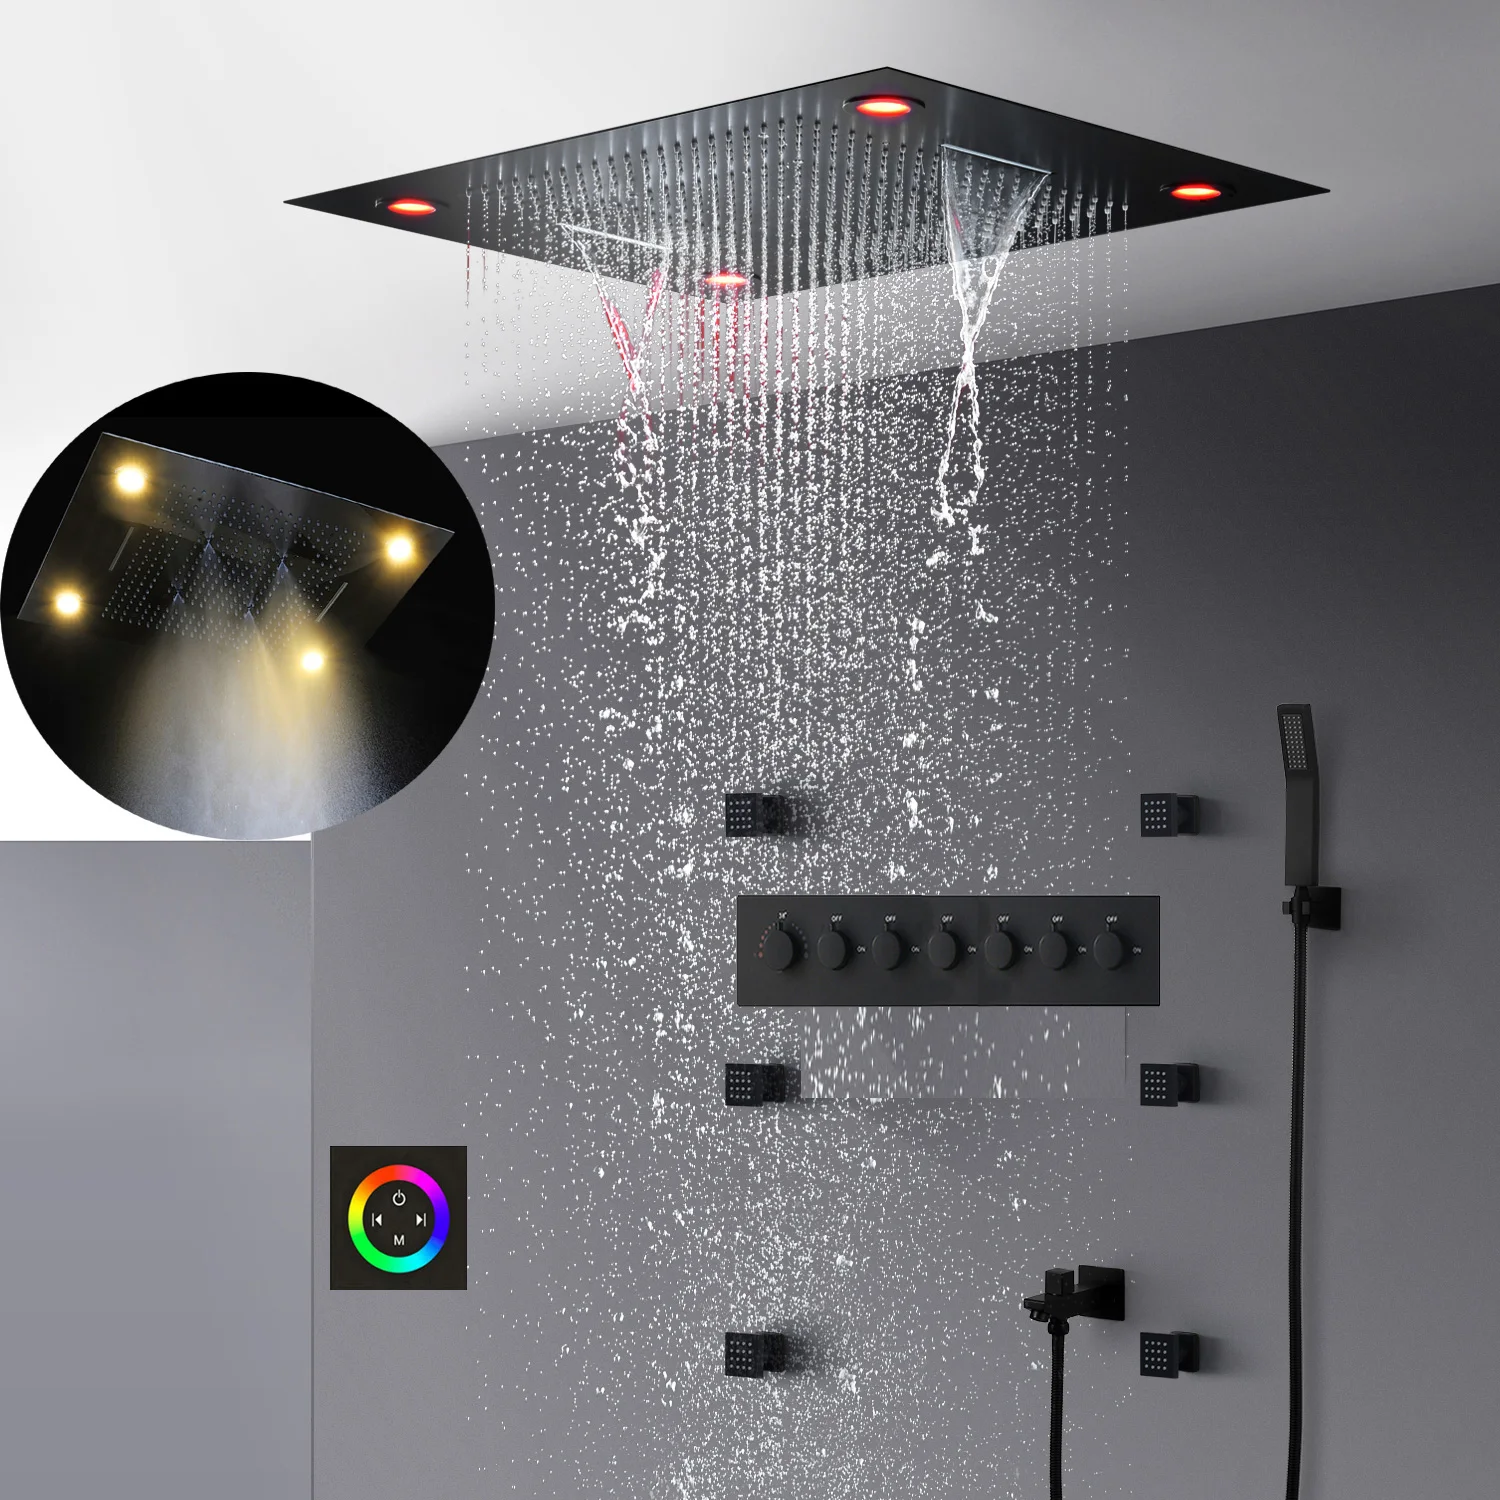 

hm 2023 High Quality Luxury Ceilling LED Shower Set Waterfall Massage Rainfall Showerhead System Thermostatic Mixer Black Faucet